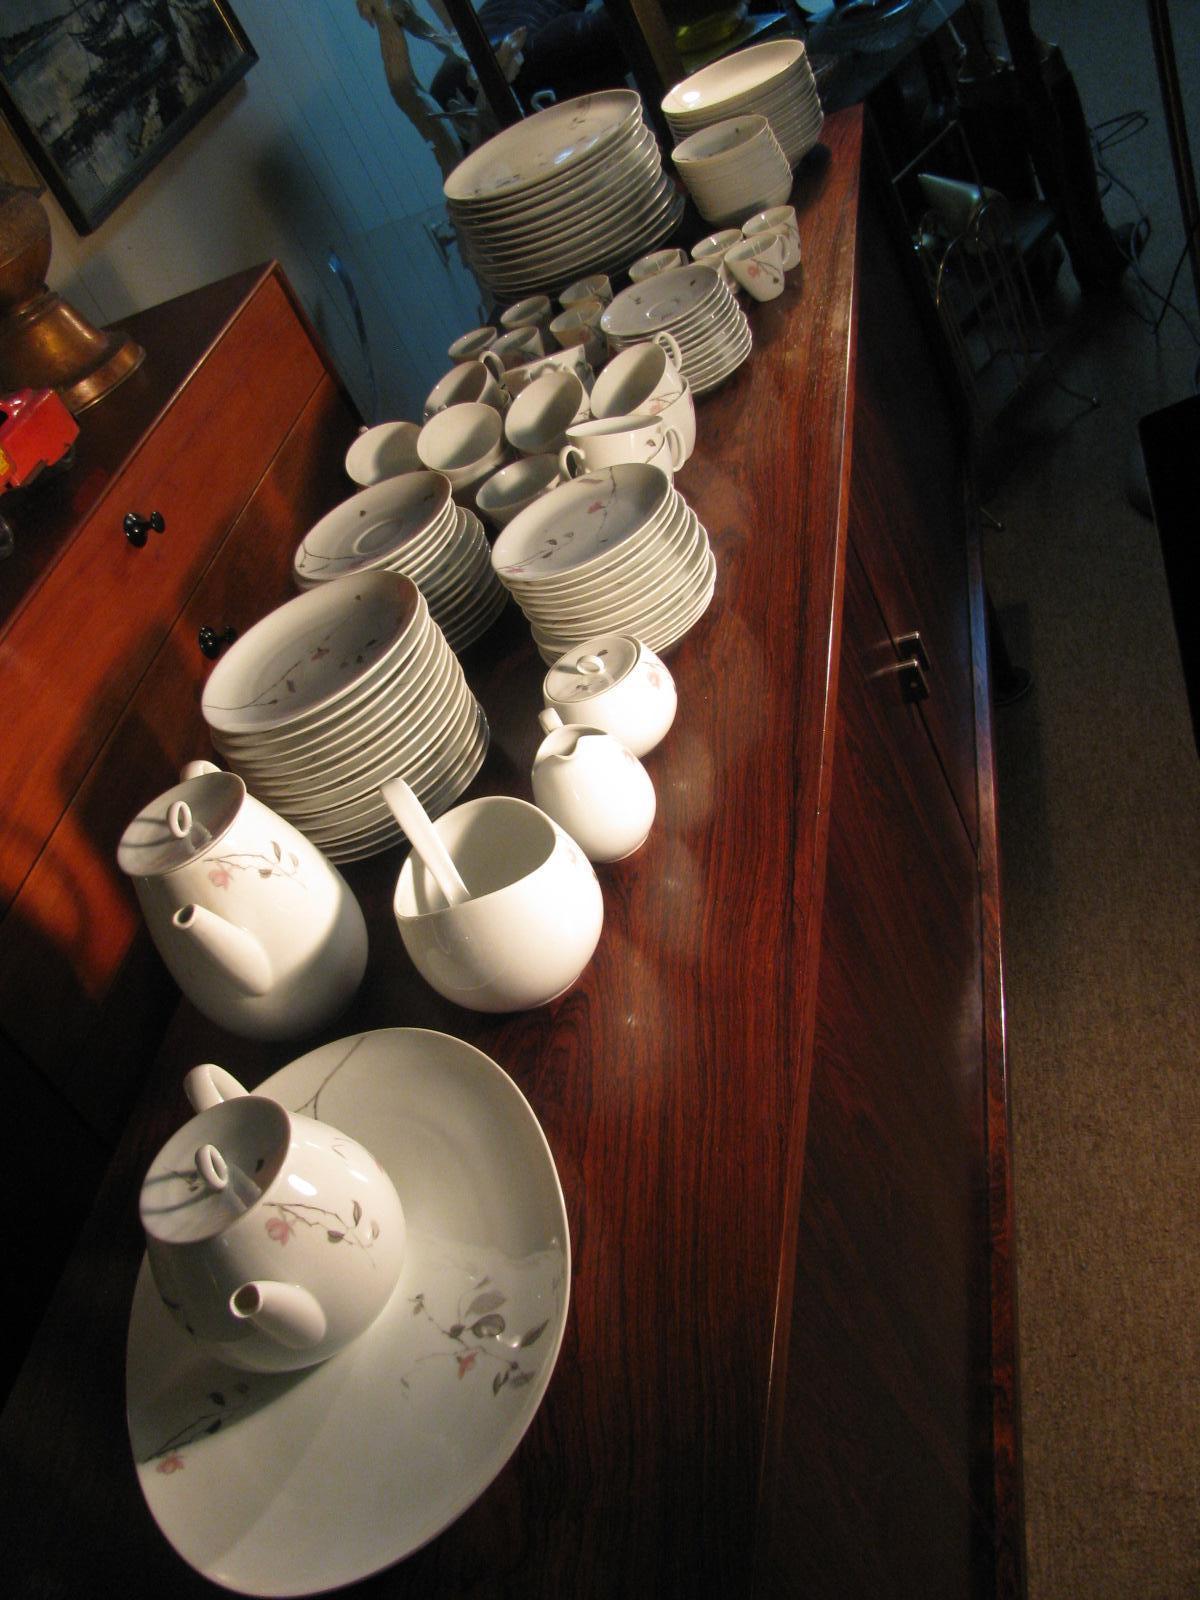 Glazed Mid Century Modern 125 Piece Dinner Set by Raymond Loewy for Rosenthal Germany For Sale